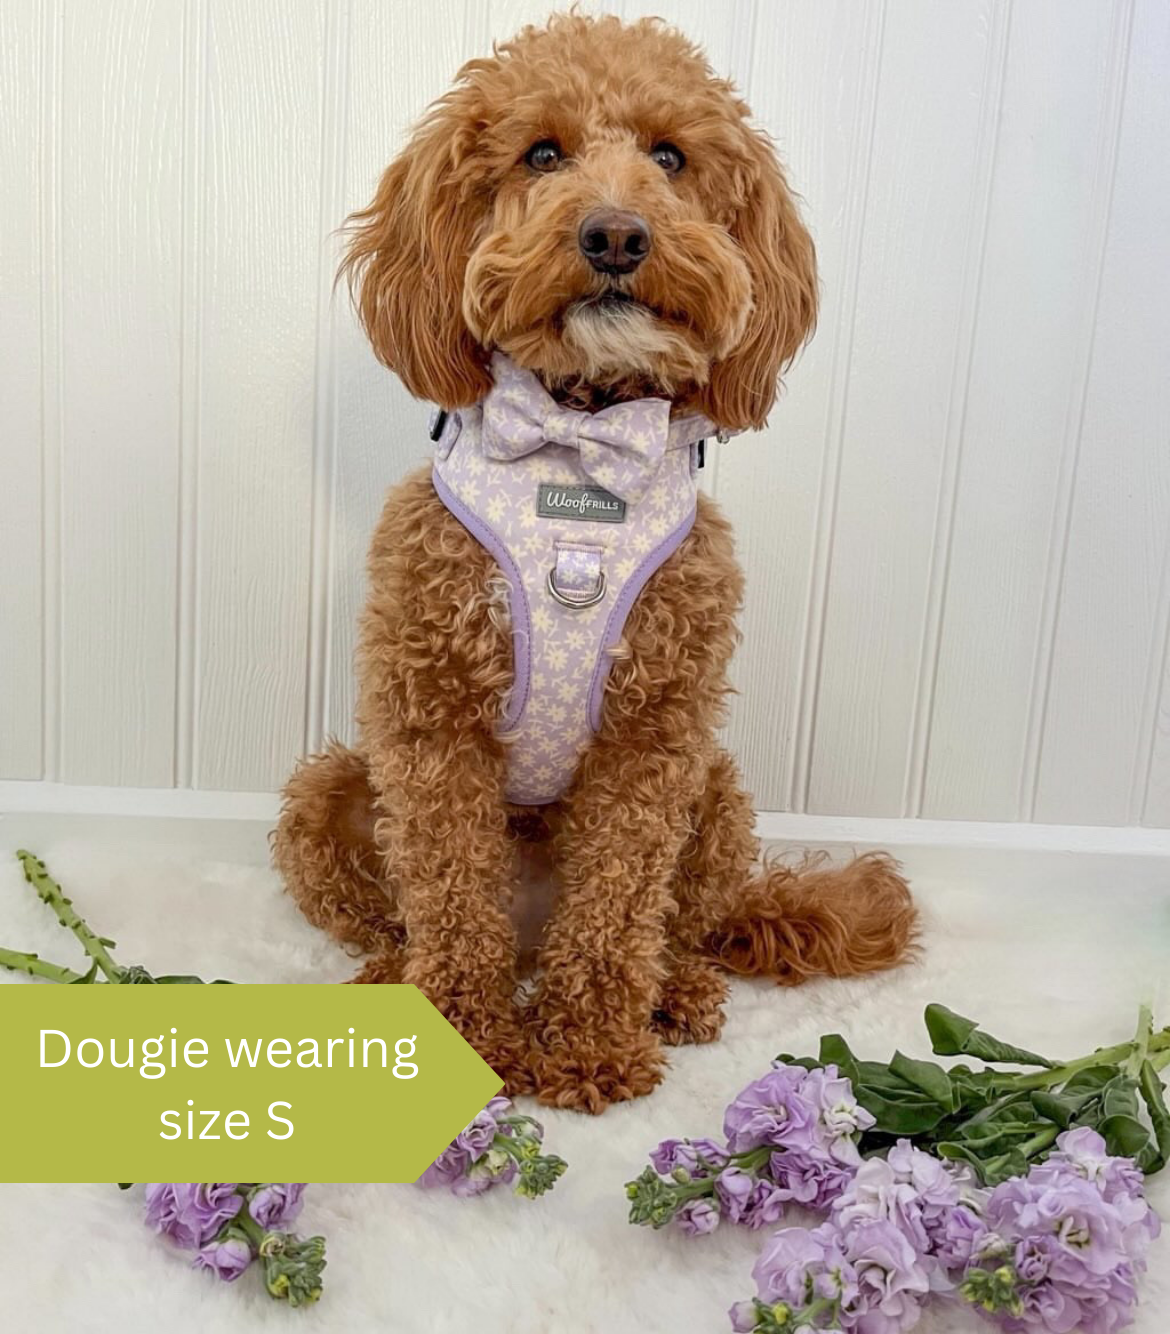 Cute dog wearing a lilac daisy harness and bow tie